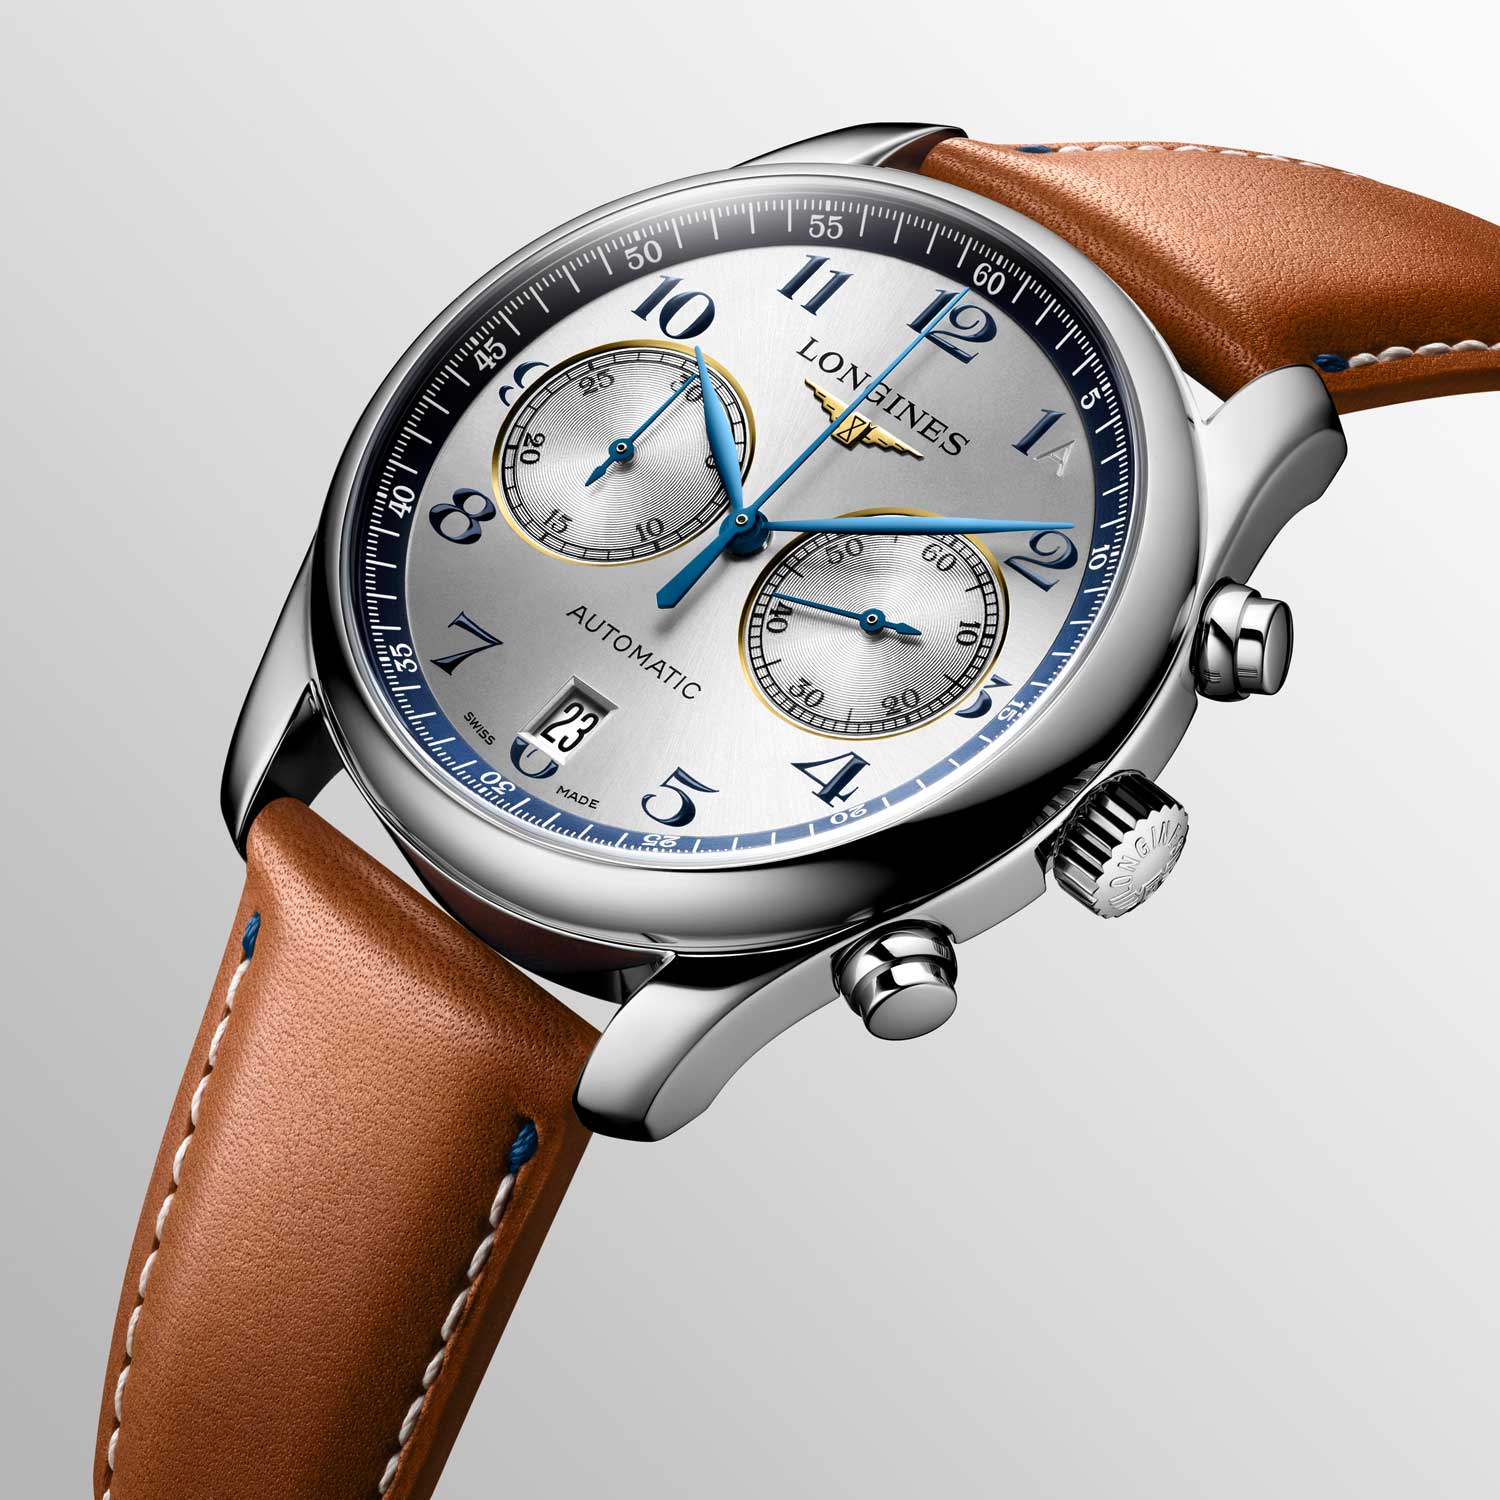 The blue Arabic numeral hour markers and hands on the watch nicely complement the blue minute track